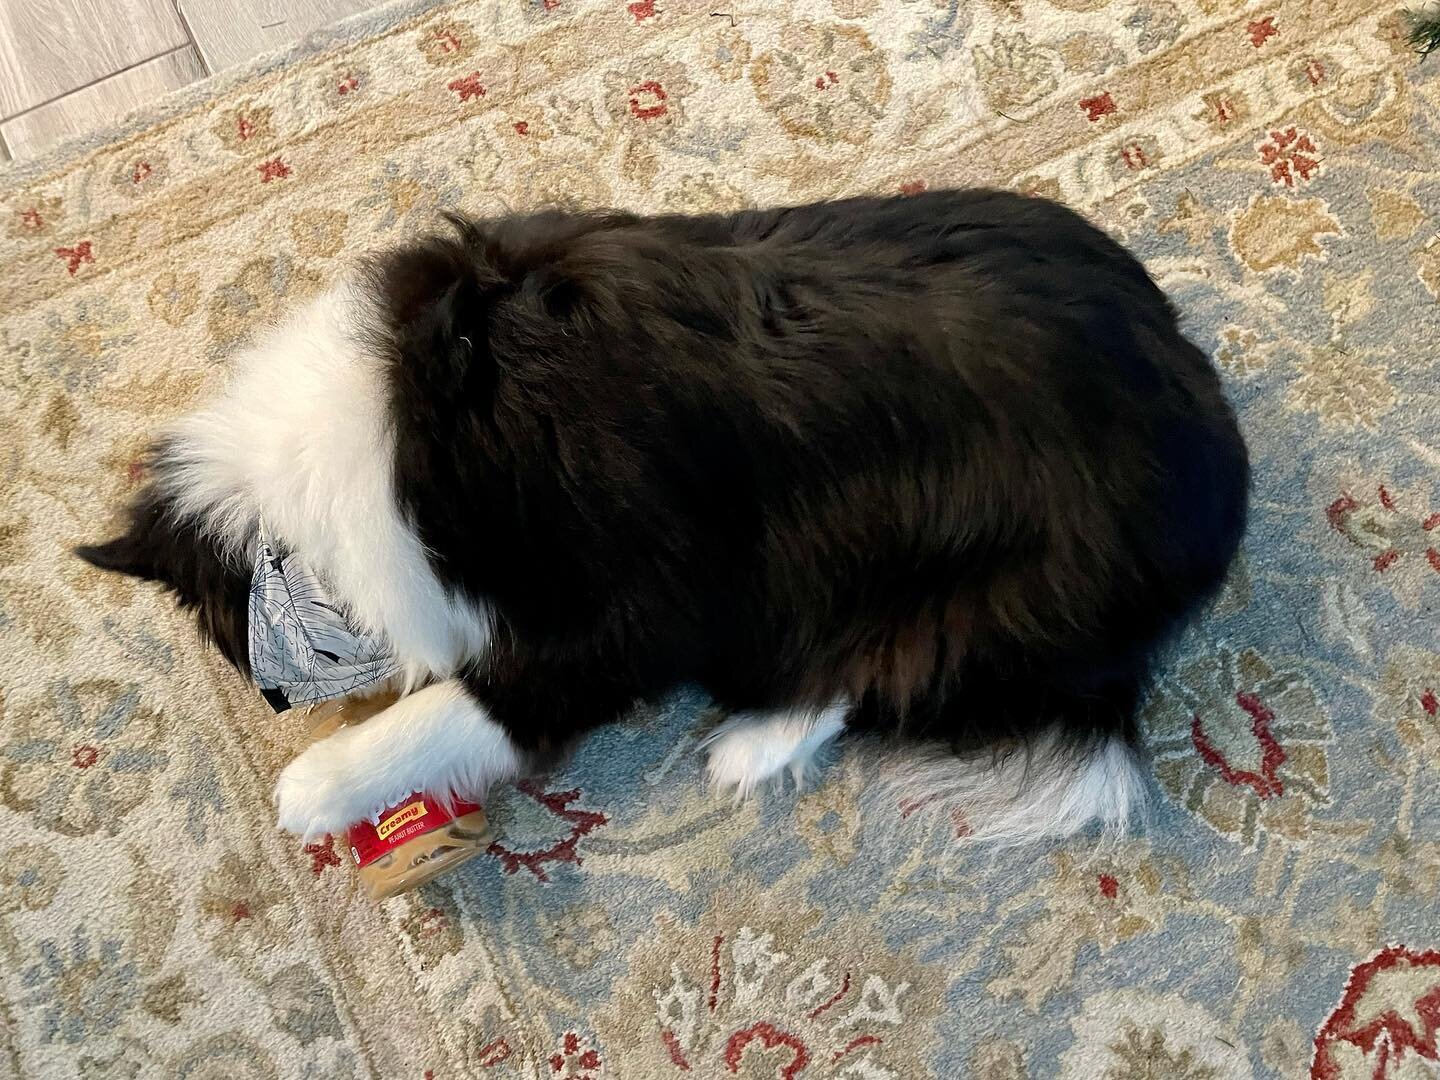 Have you ever just curled up with a jar of peanut better?  #bordercollie